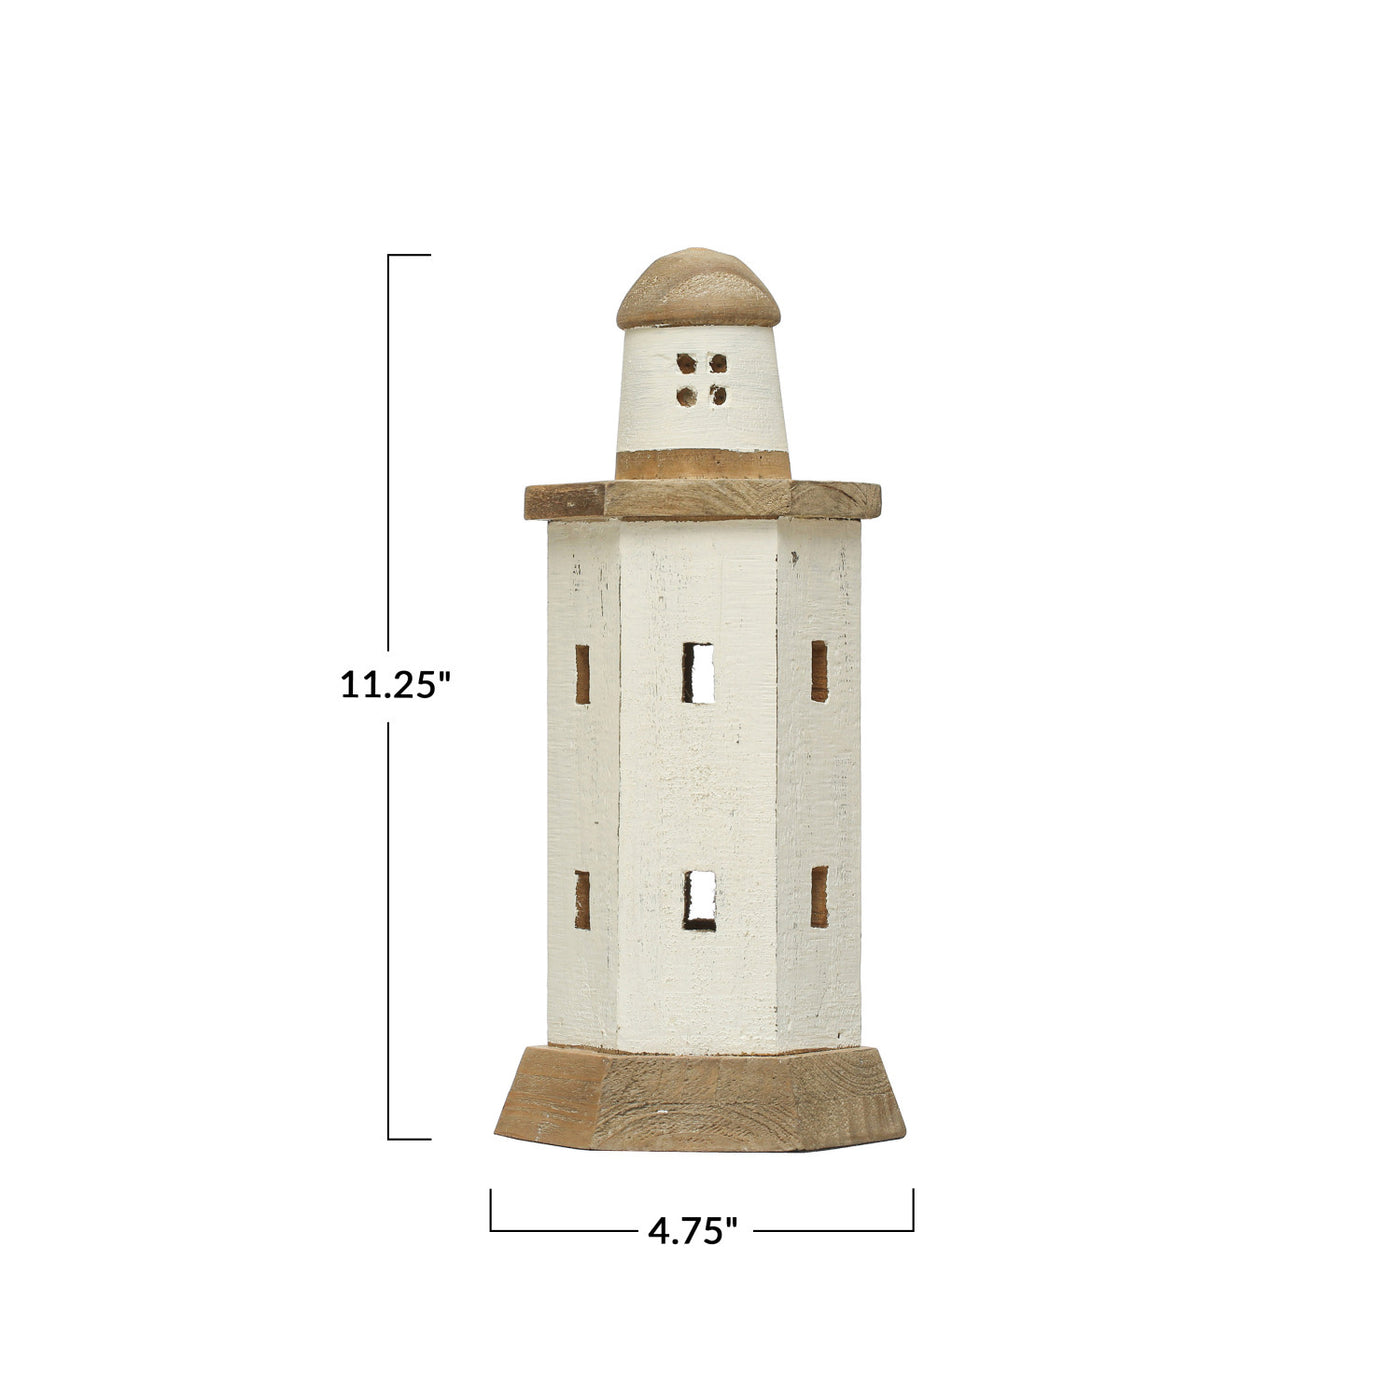 Wood Lighthouse, White & Natural, Small